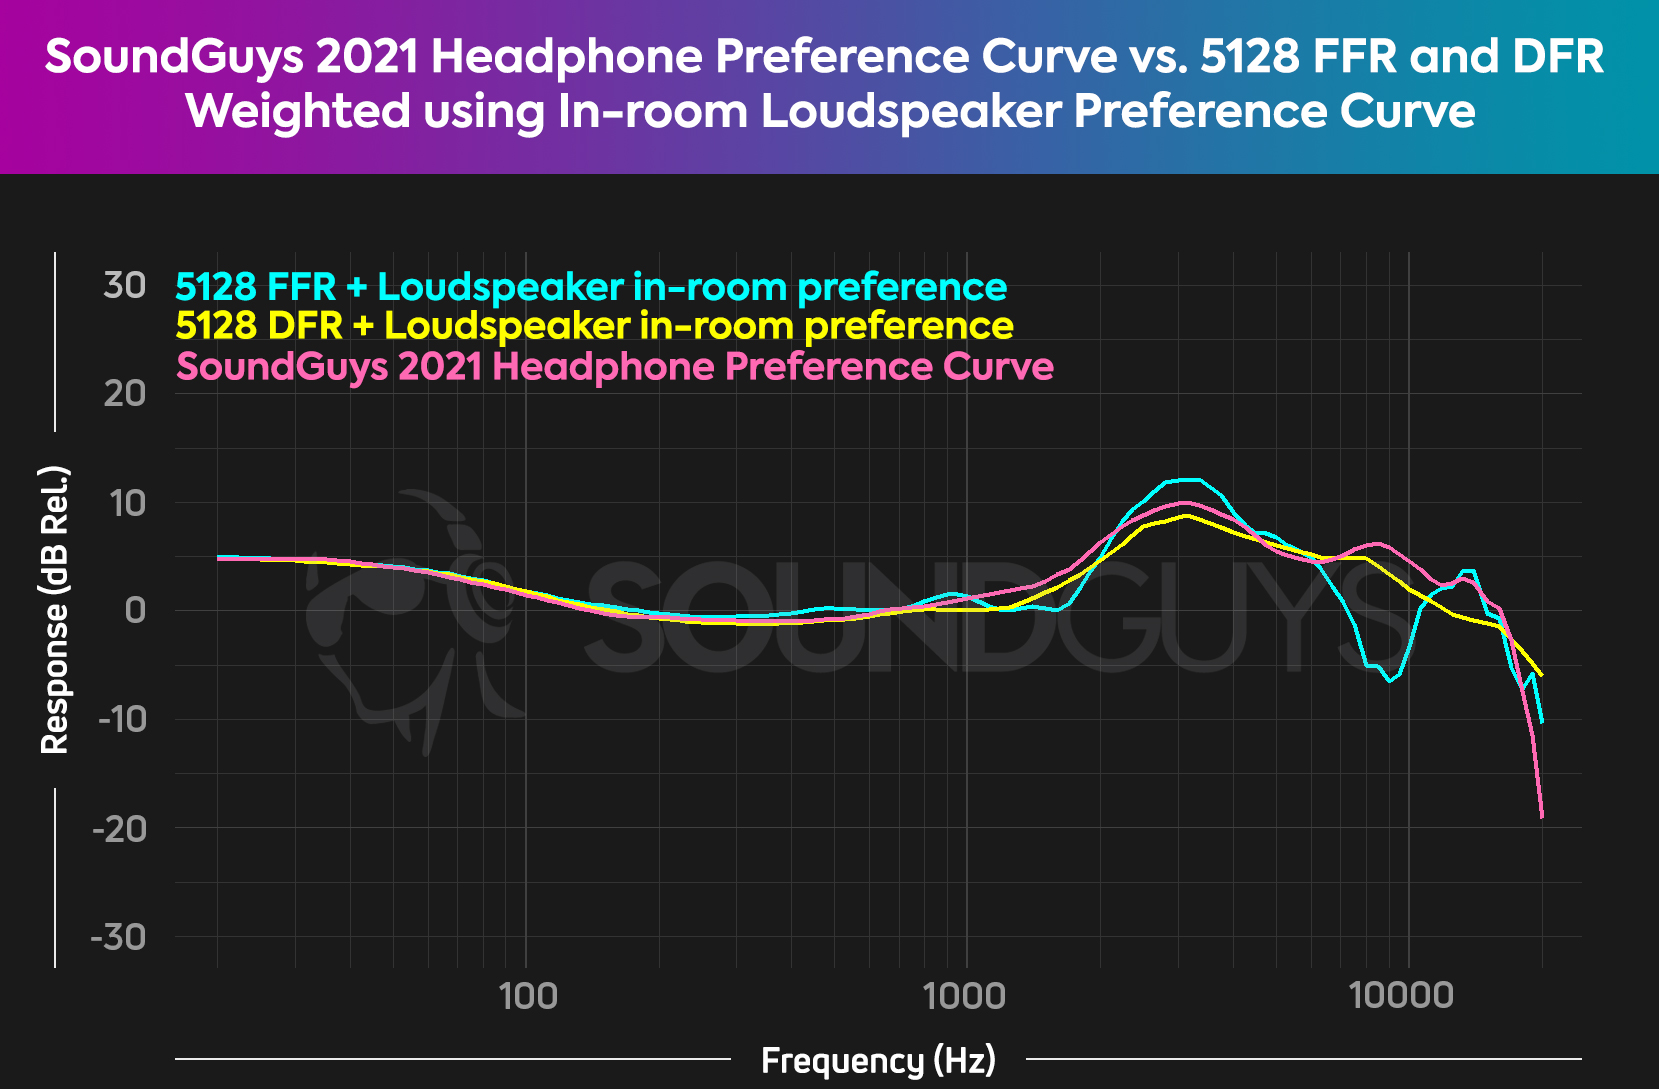 Chart showing the diffuse and free field HRTFs weighted using the loudspeaker in-room preference curve, compared to the SoundGuys 2021 headphone preference curve.